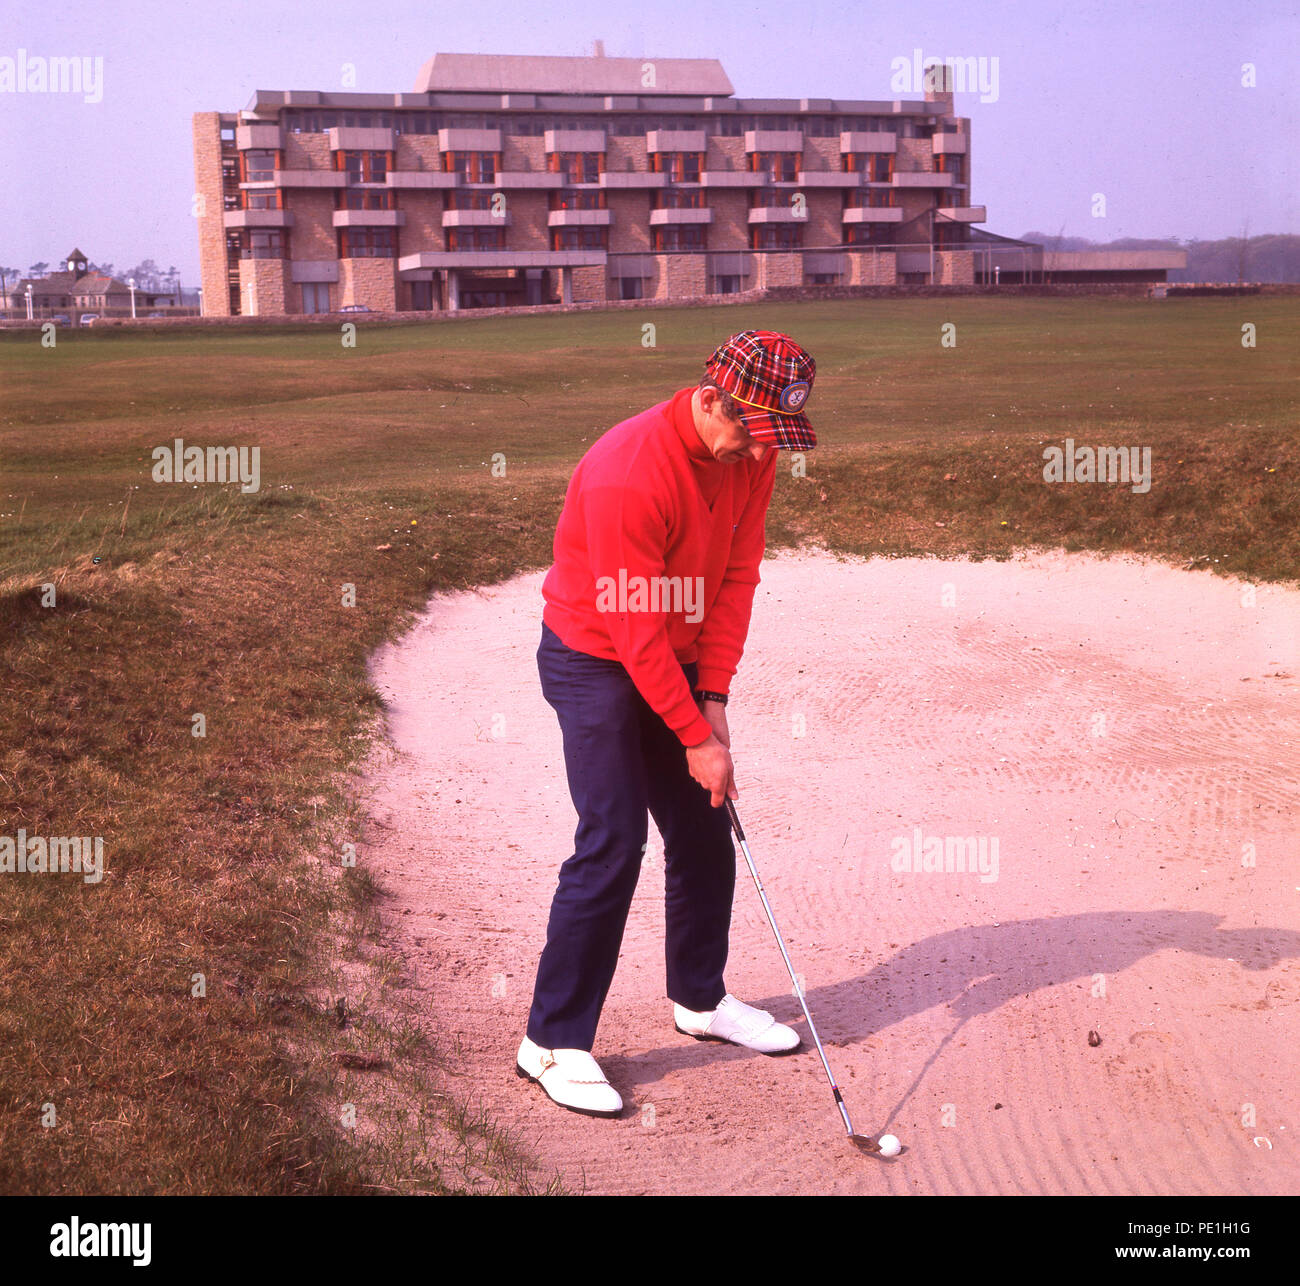 1968, historical, male golfer with tartan cap, playing out of a bunker on the old course at St Andrews golf links, with the newly built Old Course hotel in the background, St Andews, Fife, Scotland, UK. The unusual looking building was constructed by British Rail on the site of the old railway station and for such a prestigious piece of land, the hotel was a distinctly modest affair. Stock Photo